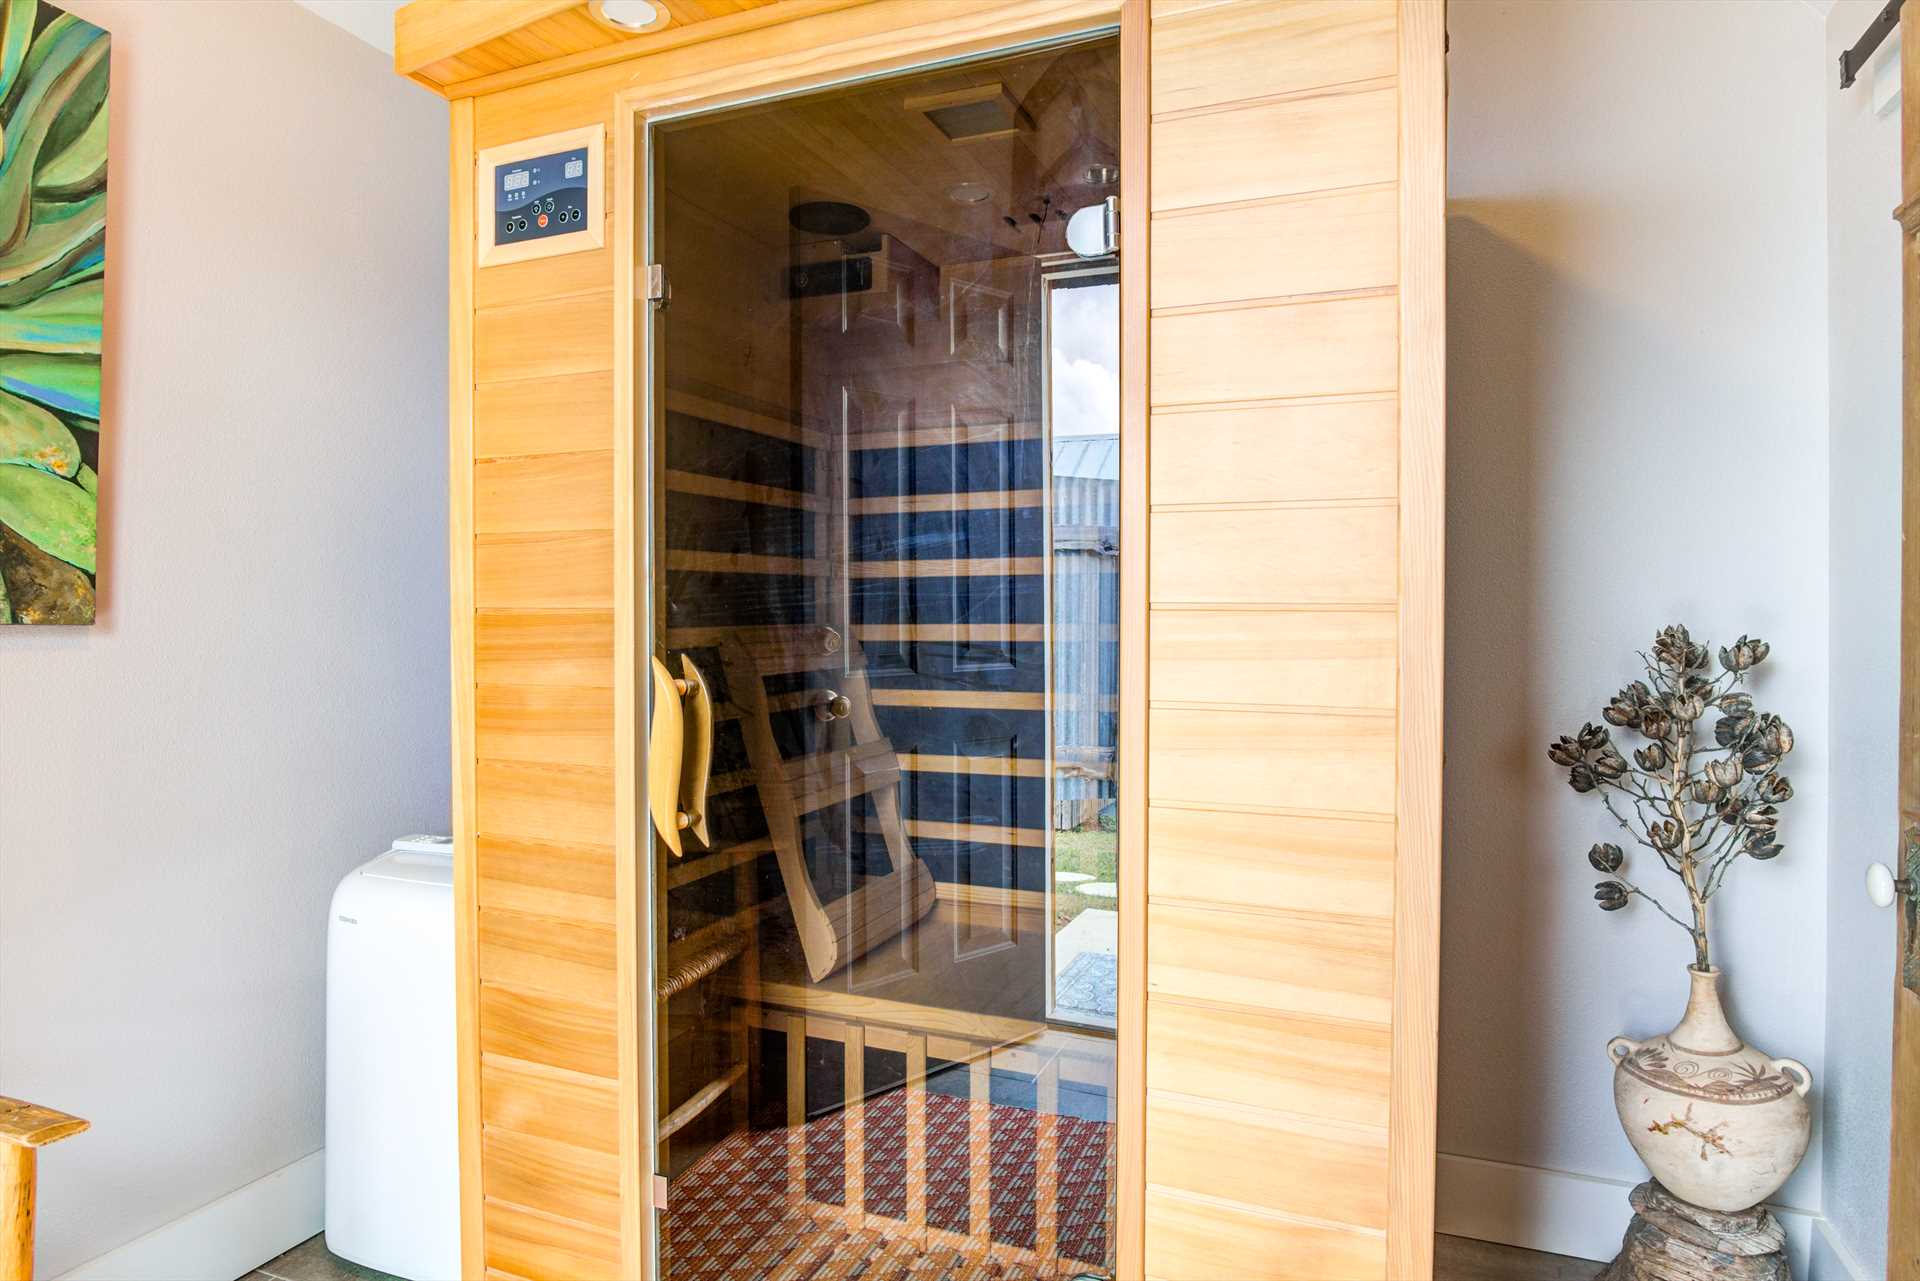                                                 Really pamper yourself in Mucho Gusto's private infrared sauna!